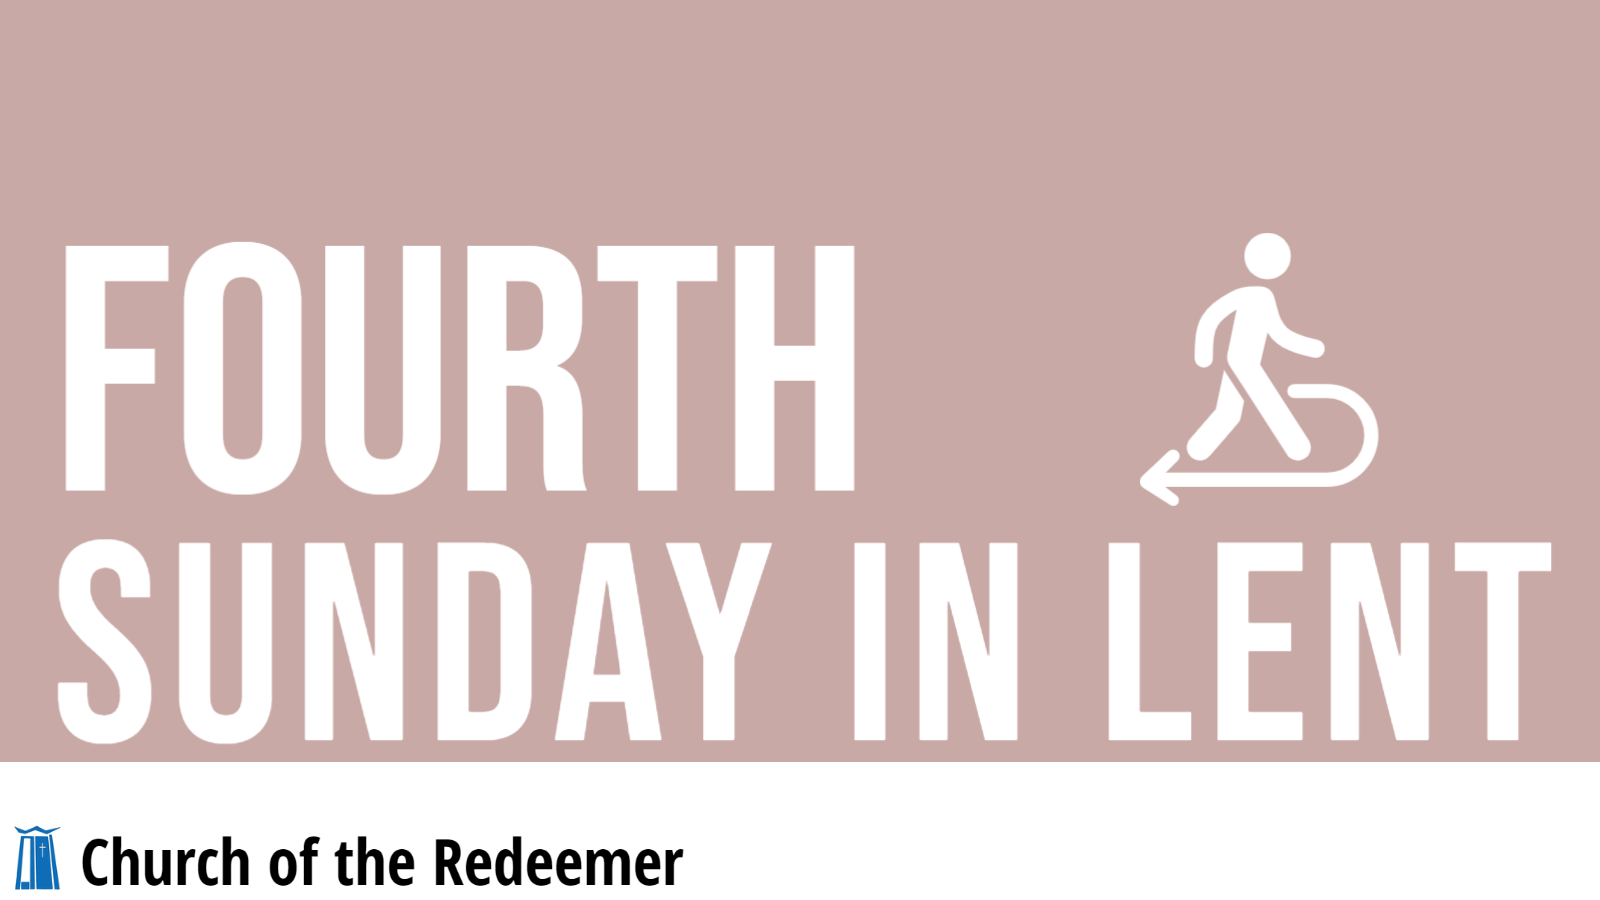 The 4th Sunday in Lent